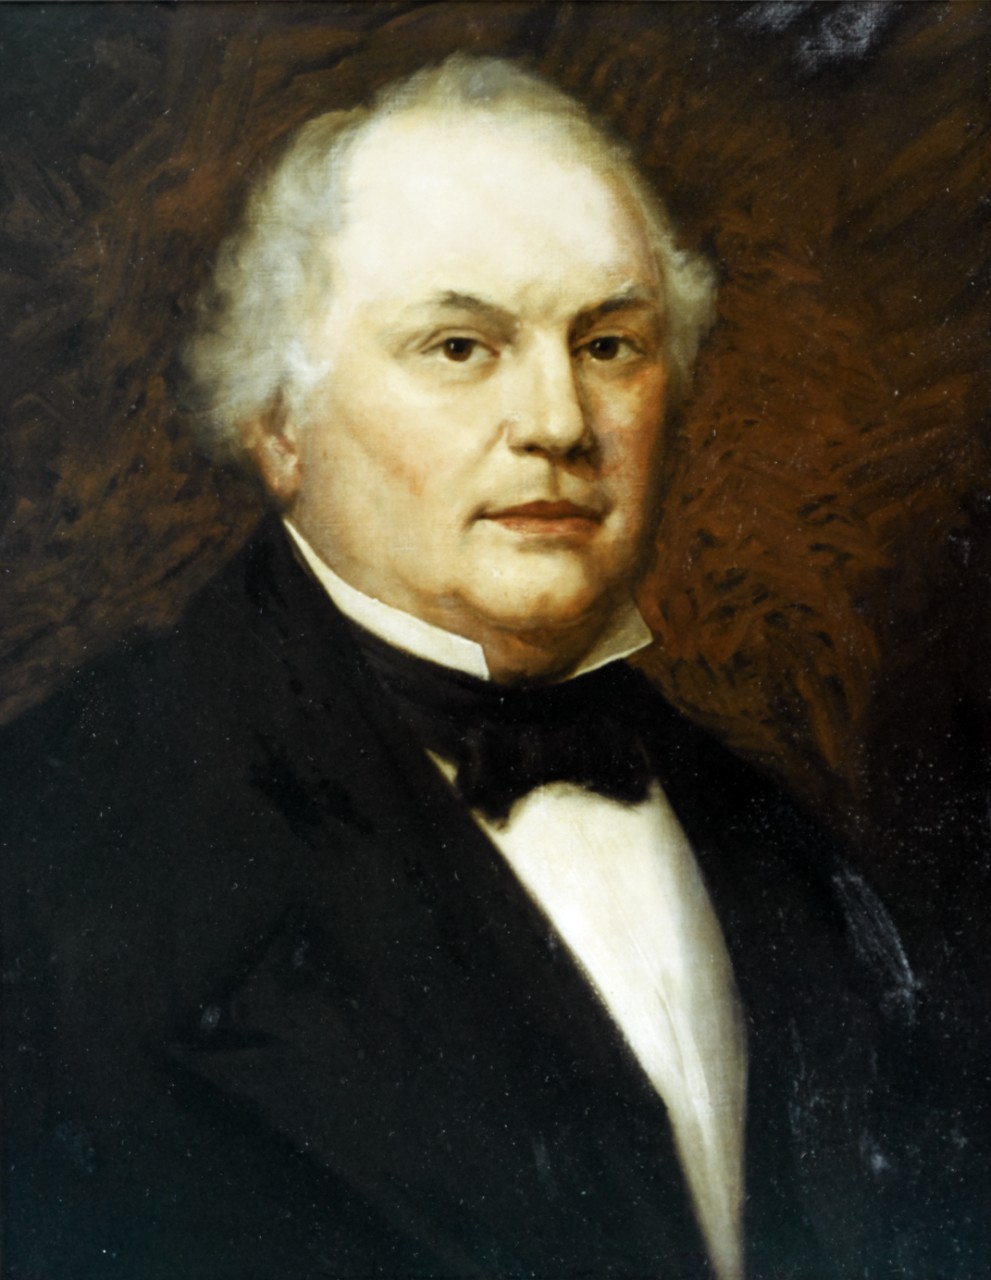 John Y. Mason had been a successful lawyer and landowner in Virginia before becoming involved in national politics. He served as Secretary of the Navy from 1844-45, and again from 1846-1849. Mason continued the Navy’s age of scientific exploratio...